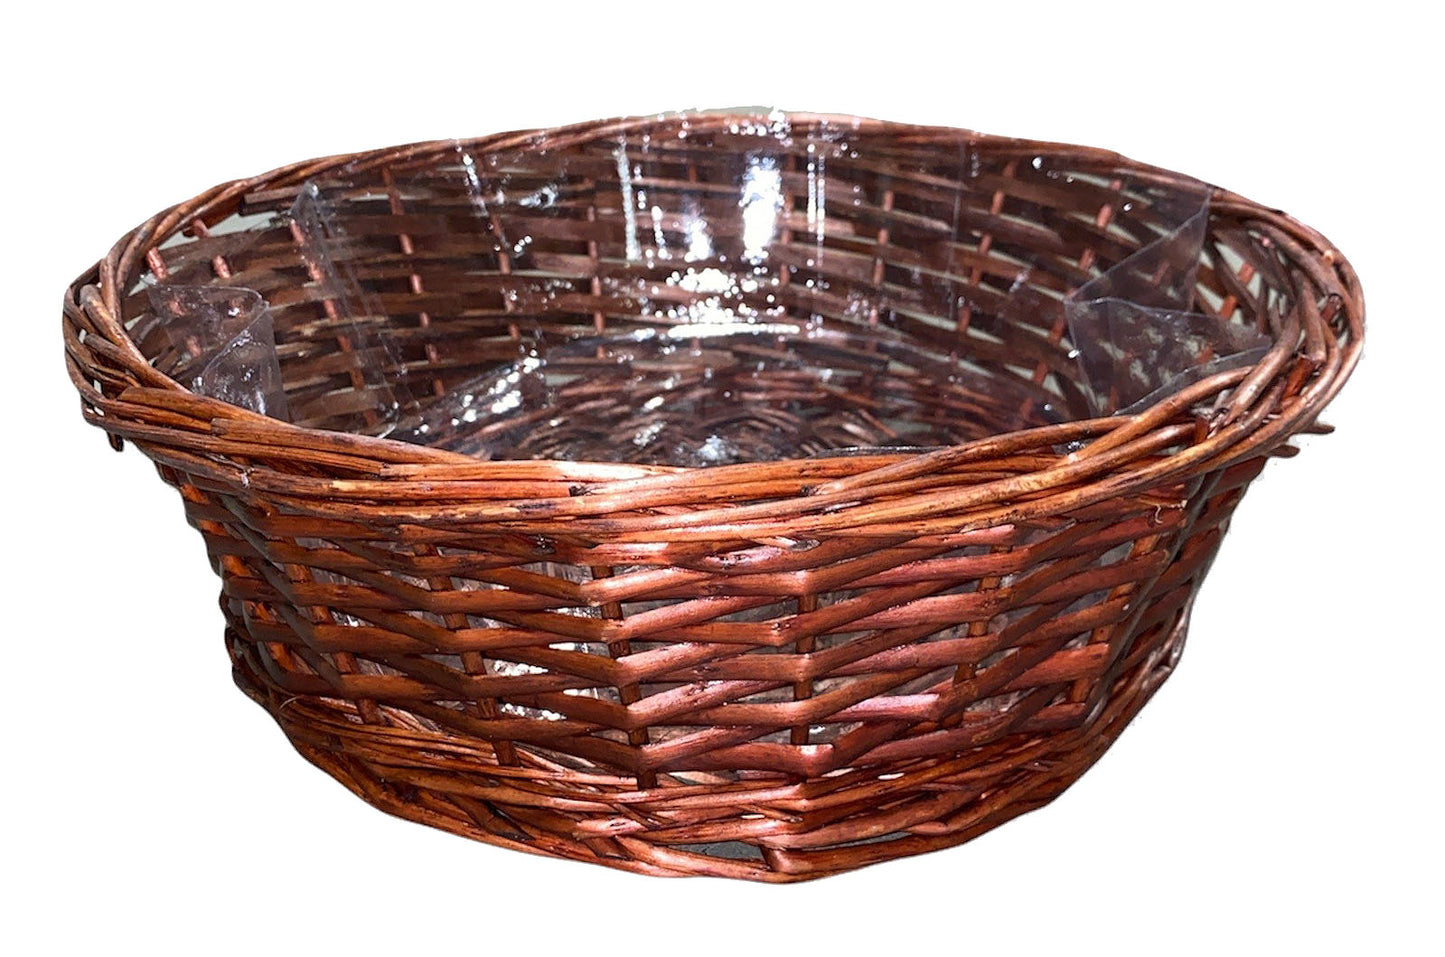 Round Split WILLOW TRAY - 10.36 x 4.78 inch deep - STAINED BROWN - with Hard Liner - fits a 18x24 basket bag - NEW222